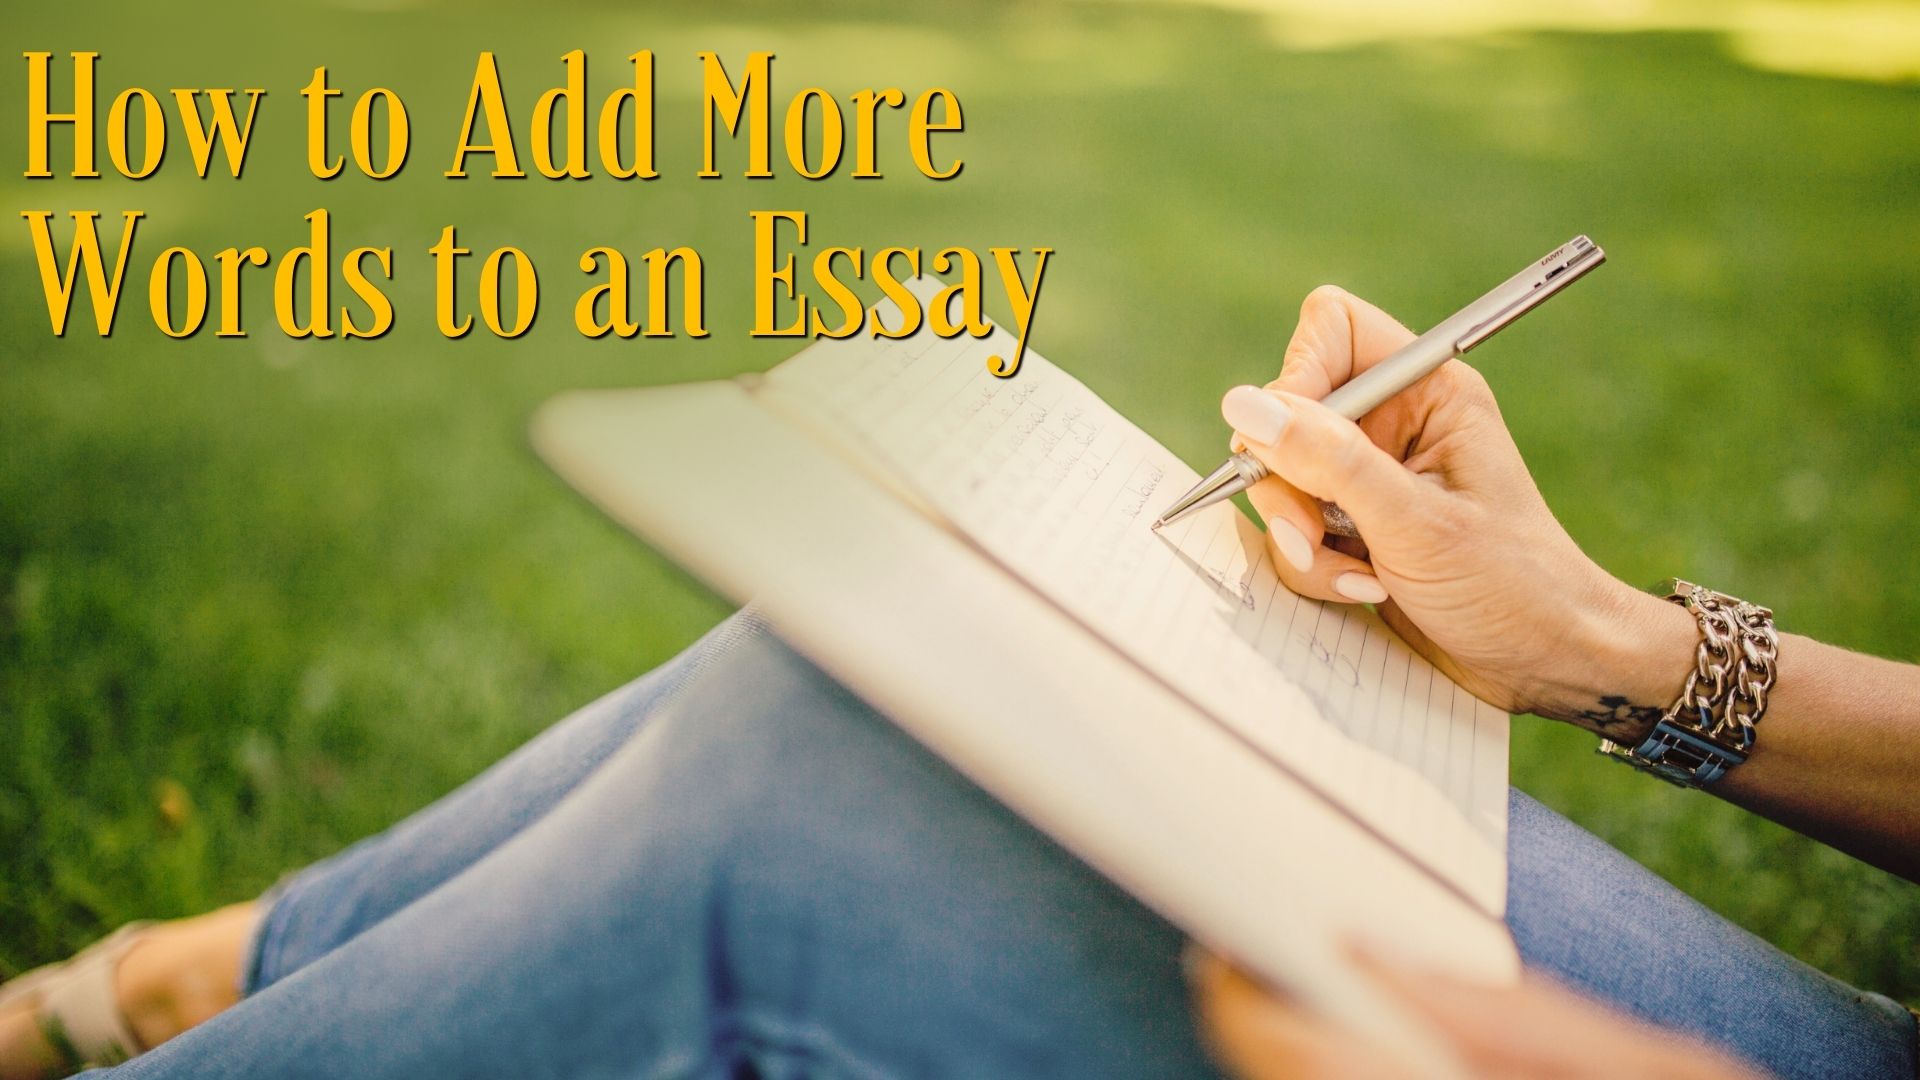 How To Add More Words To Essay: Smart Guide